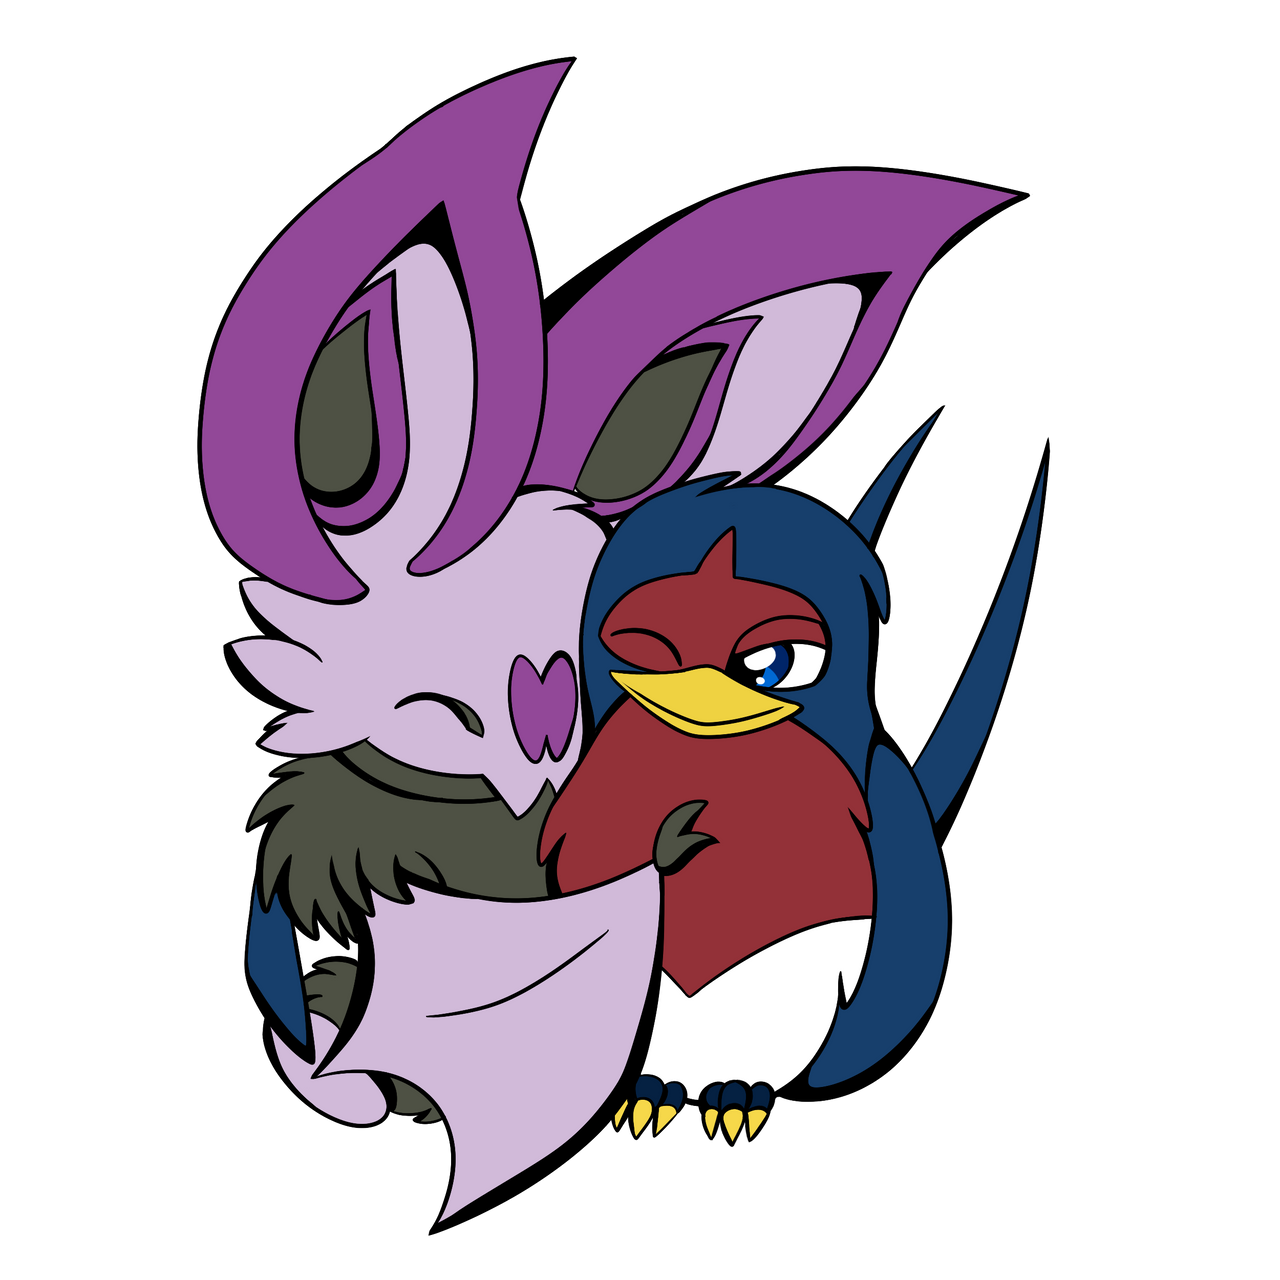 Shiny Lugia And Shiny Mew by CrystalTheLuxio on DeviantArt